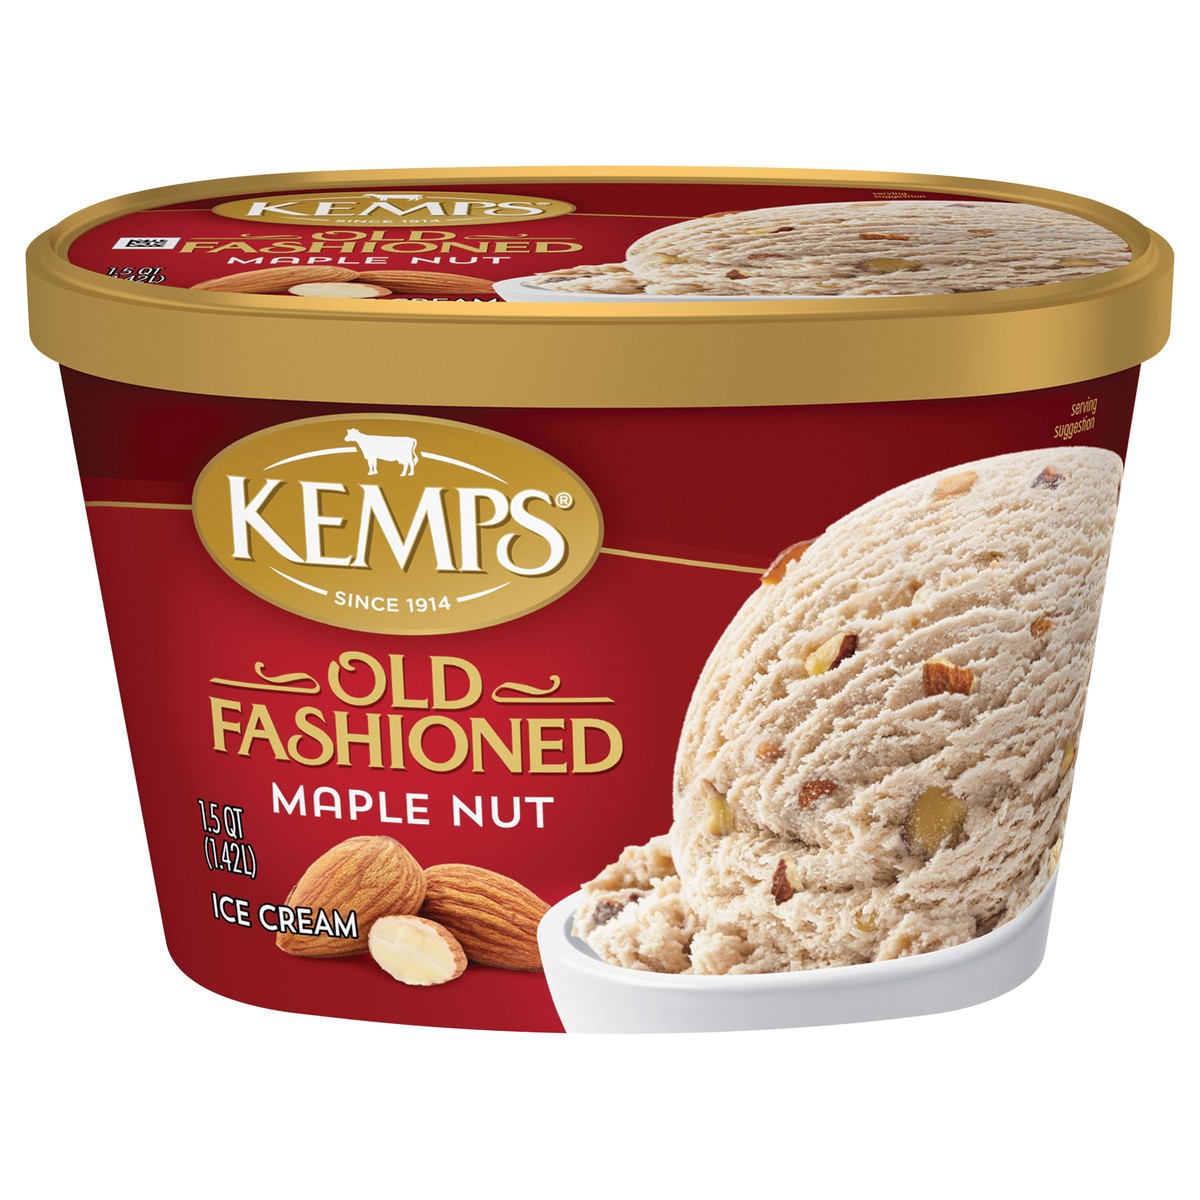 slide 1 of 13, Kemps Old Fashioned Maple Nut Ice Cream, 1.5 qt